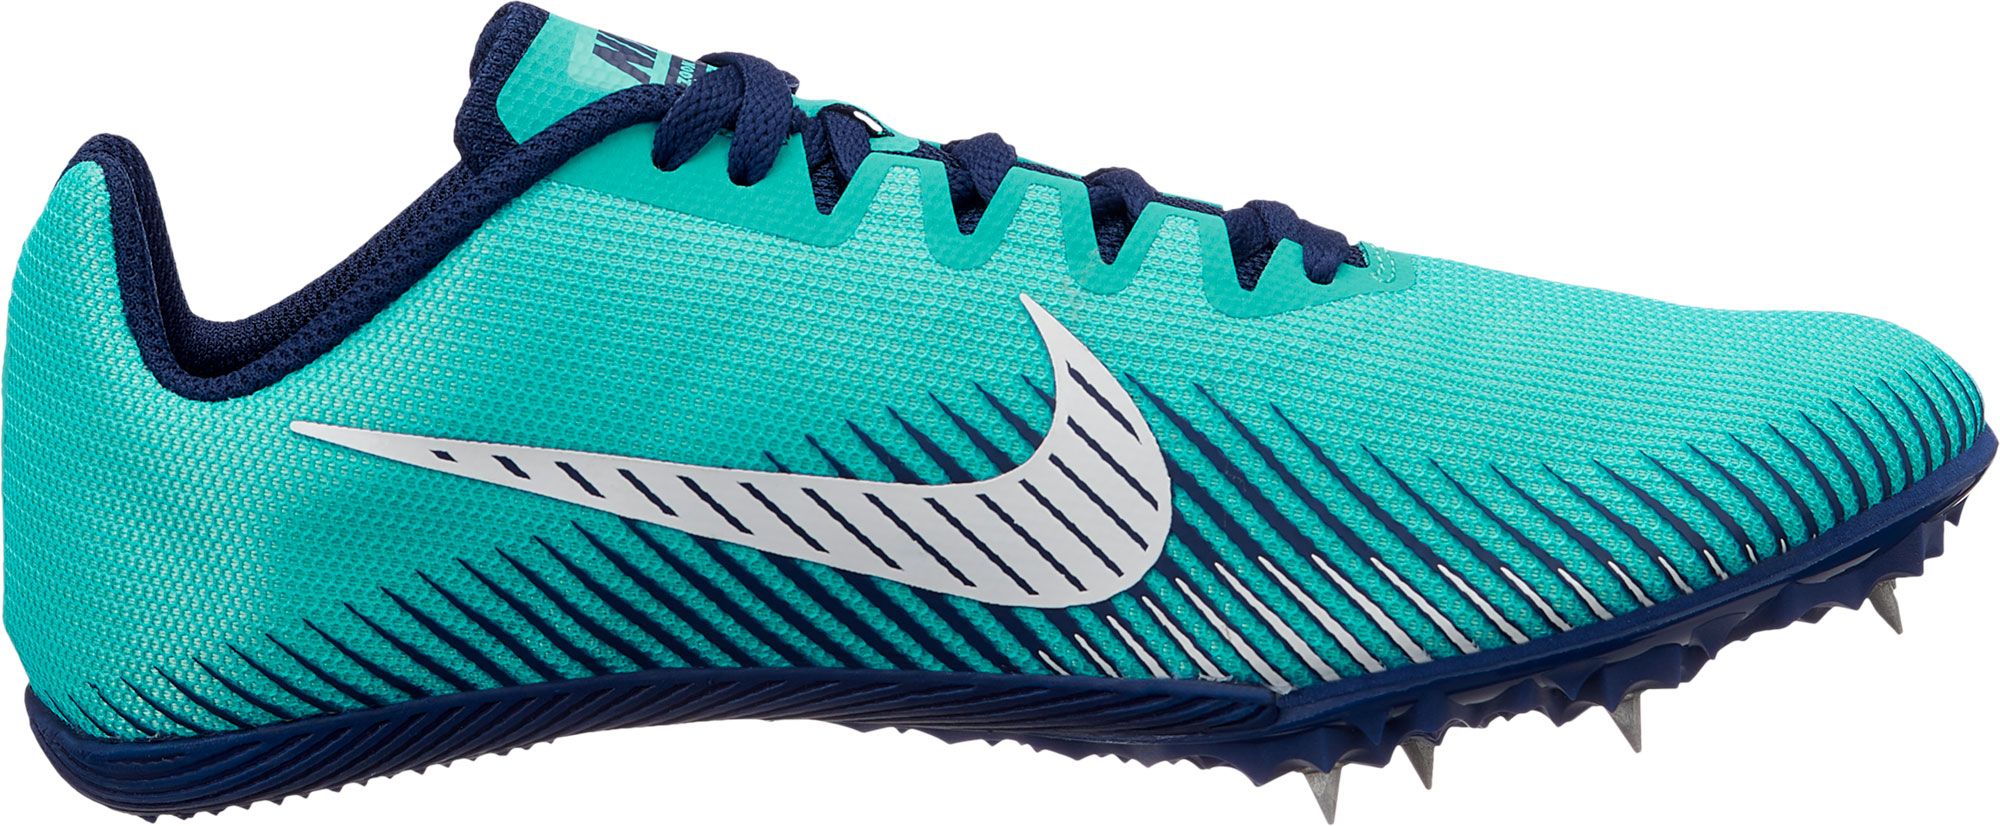 long distance spikes womens nike